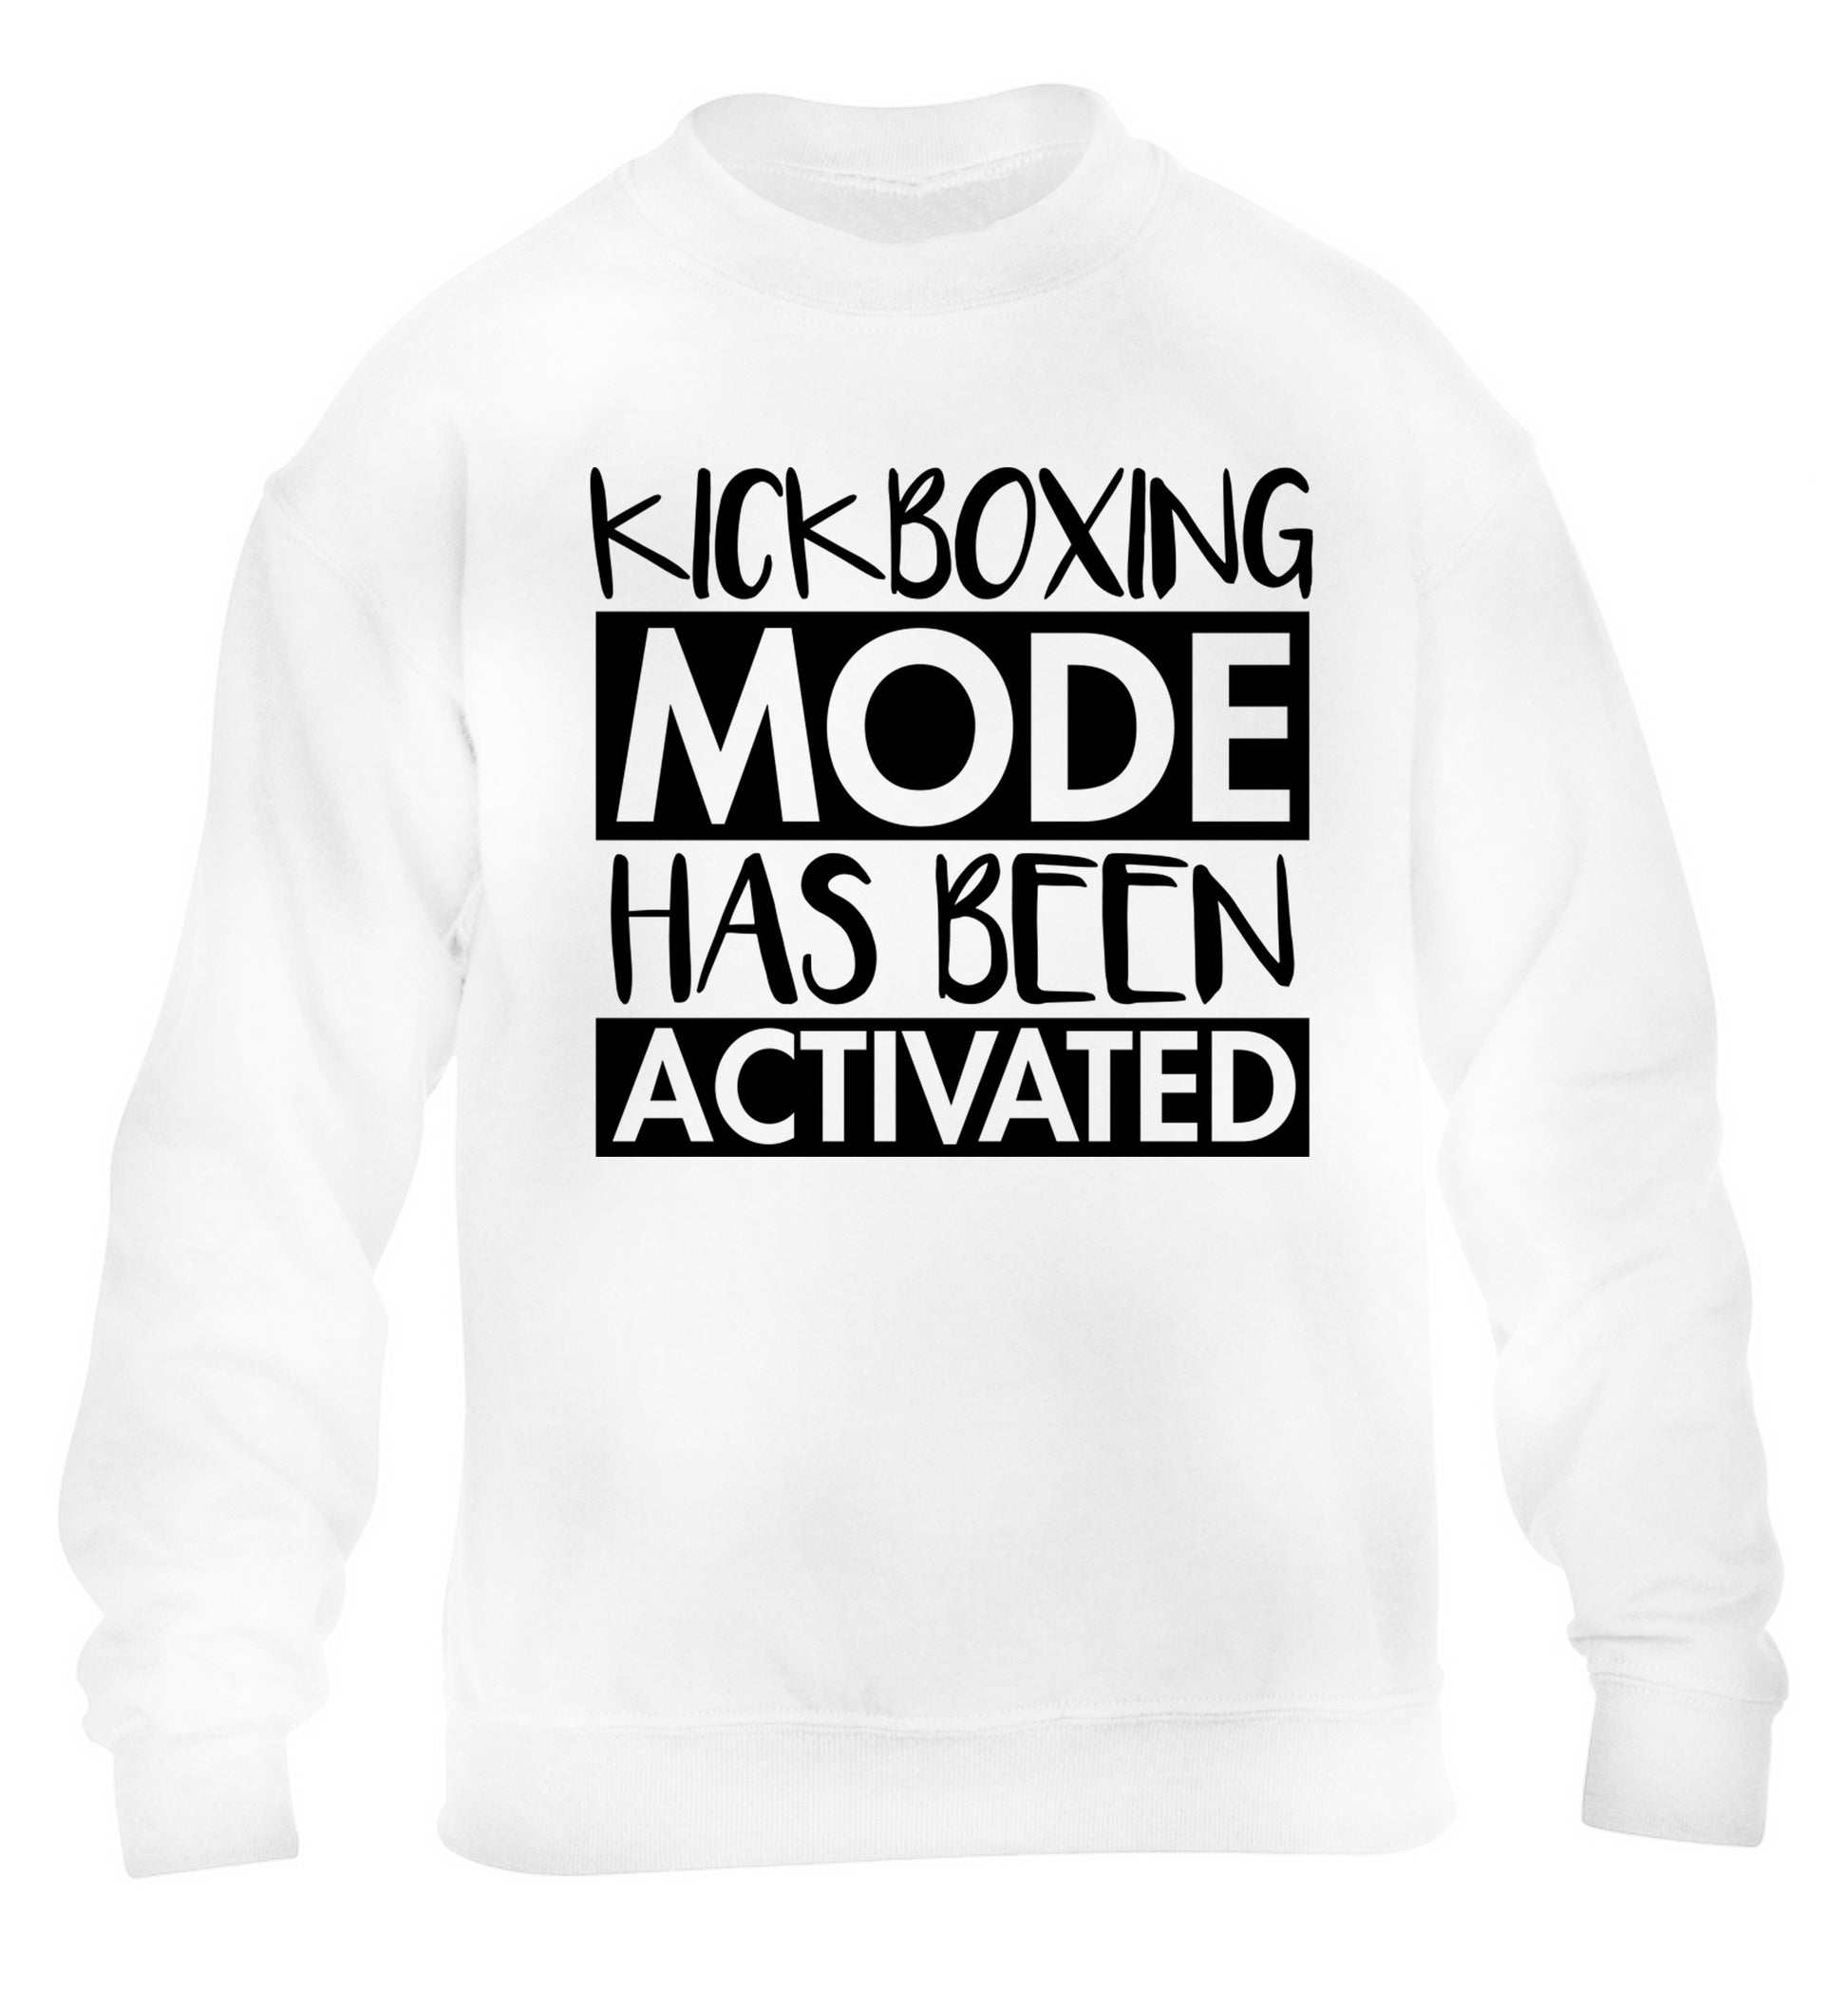 Kickboxing mode activated children's white sweater 12-14 Years